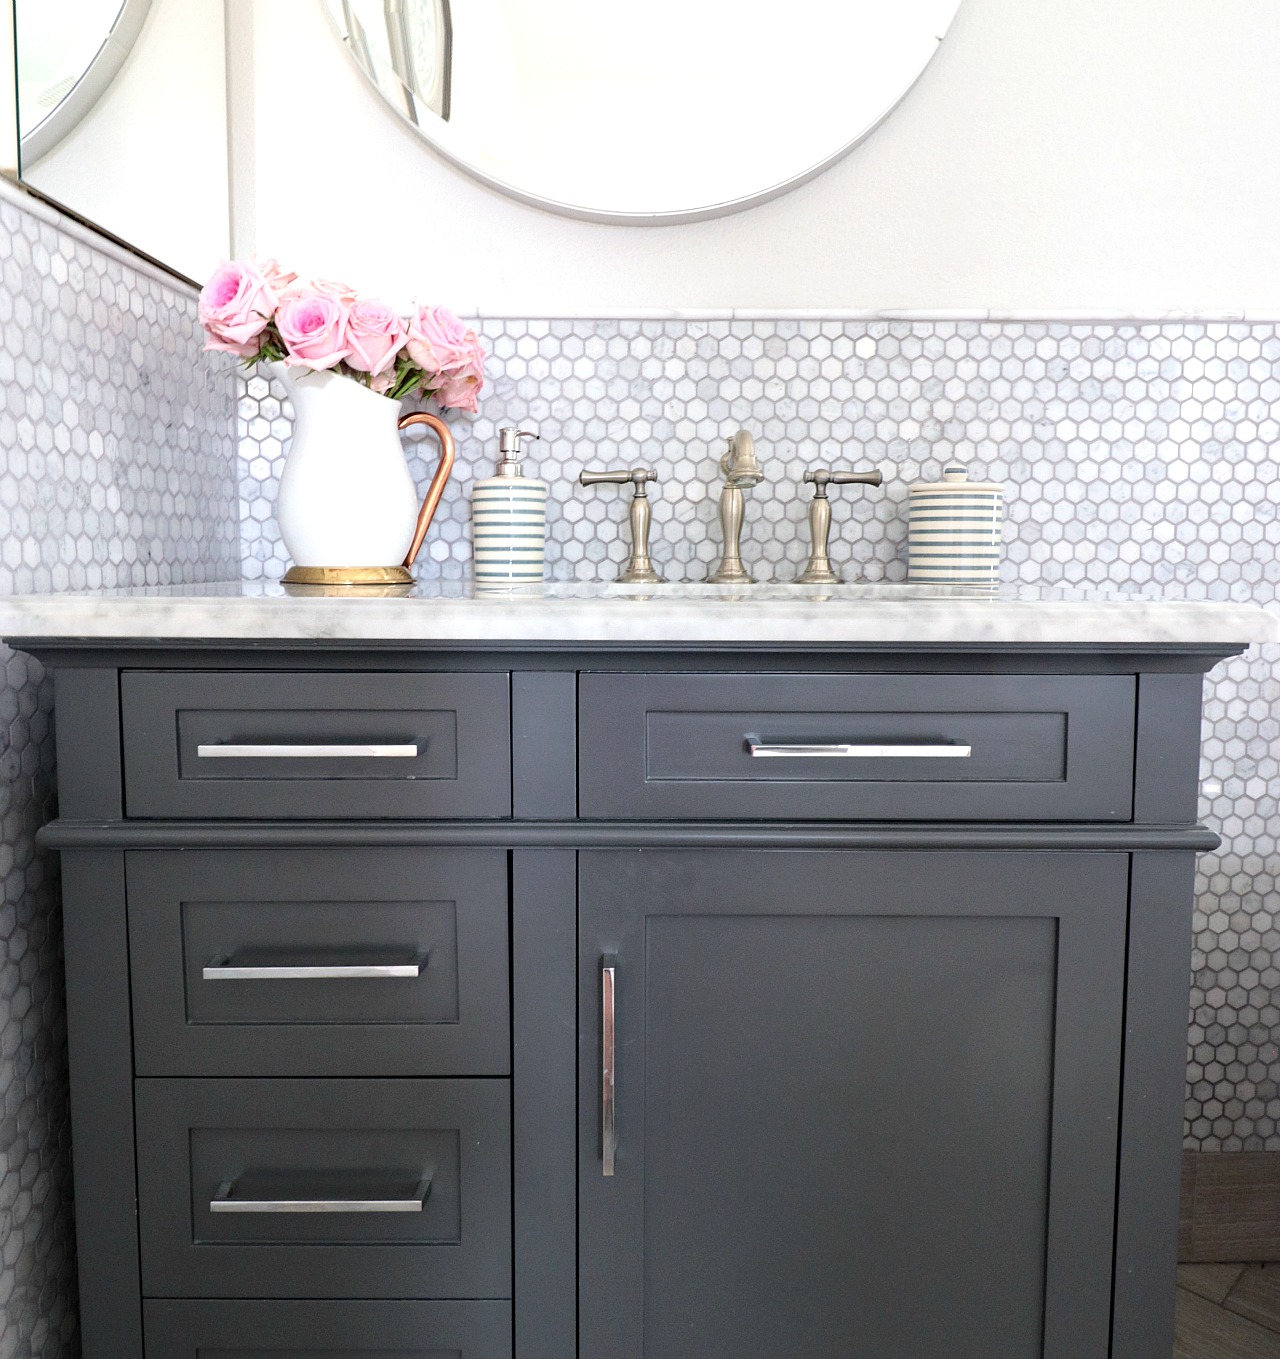 Easy Spring Bathroom Refresh & Bath Towel Giveaway! - Setting For Four  Interiors